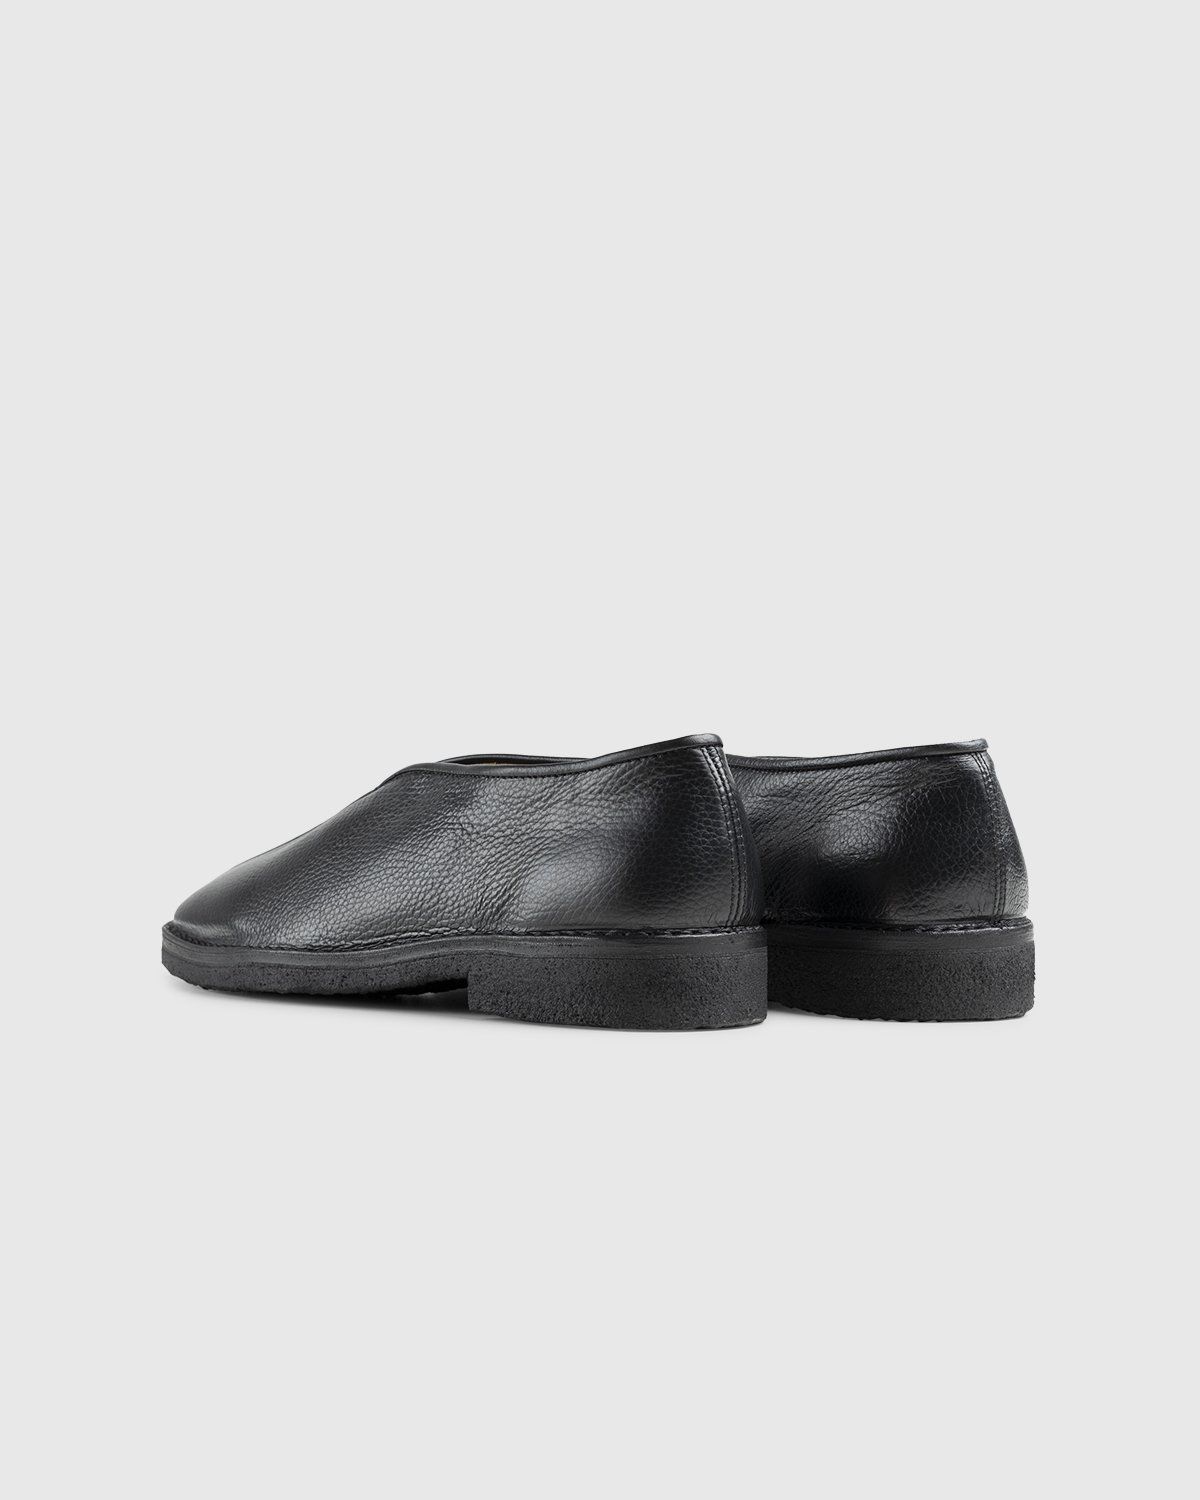 Lemaire – Leather Chinese Slippers Black - Shoes - Black - Image 5